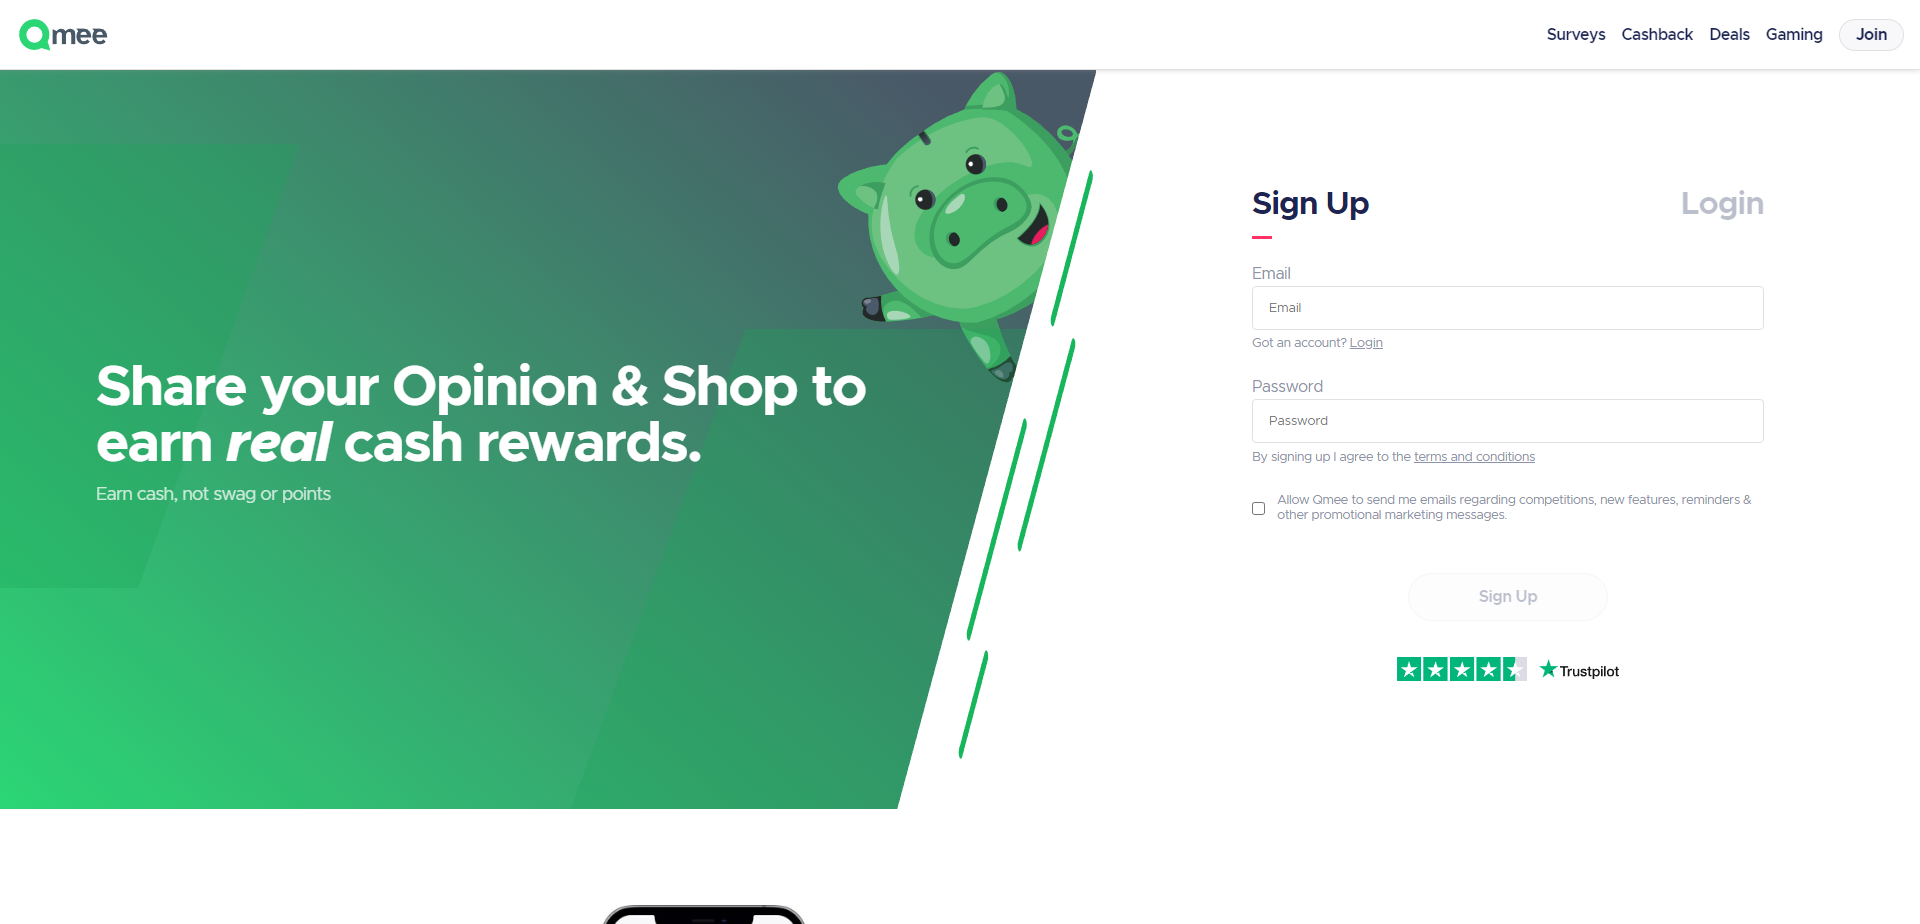 Landing Page for Qmee